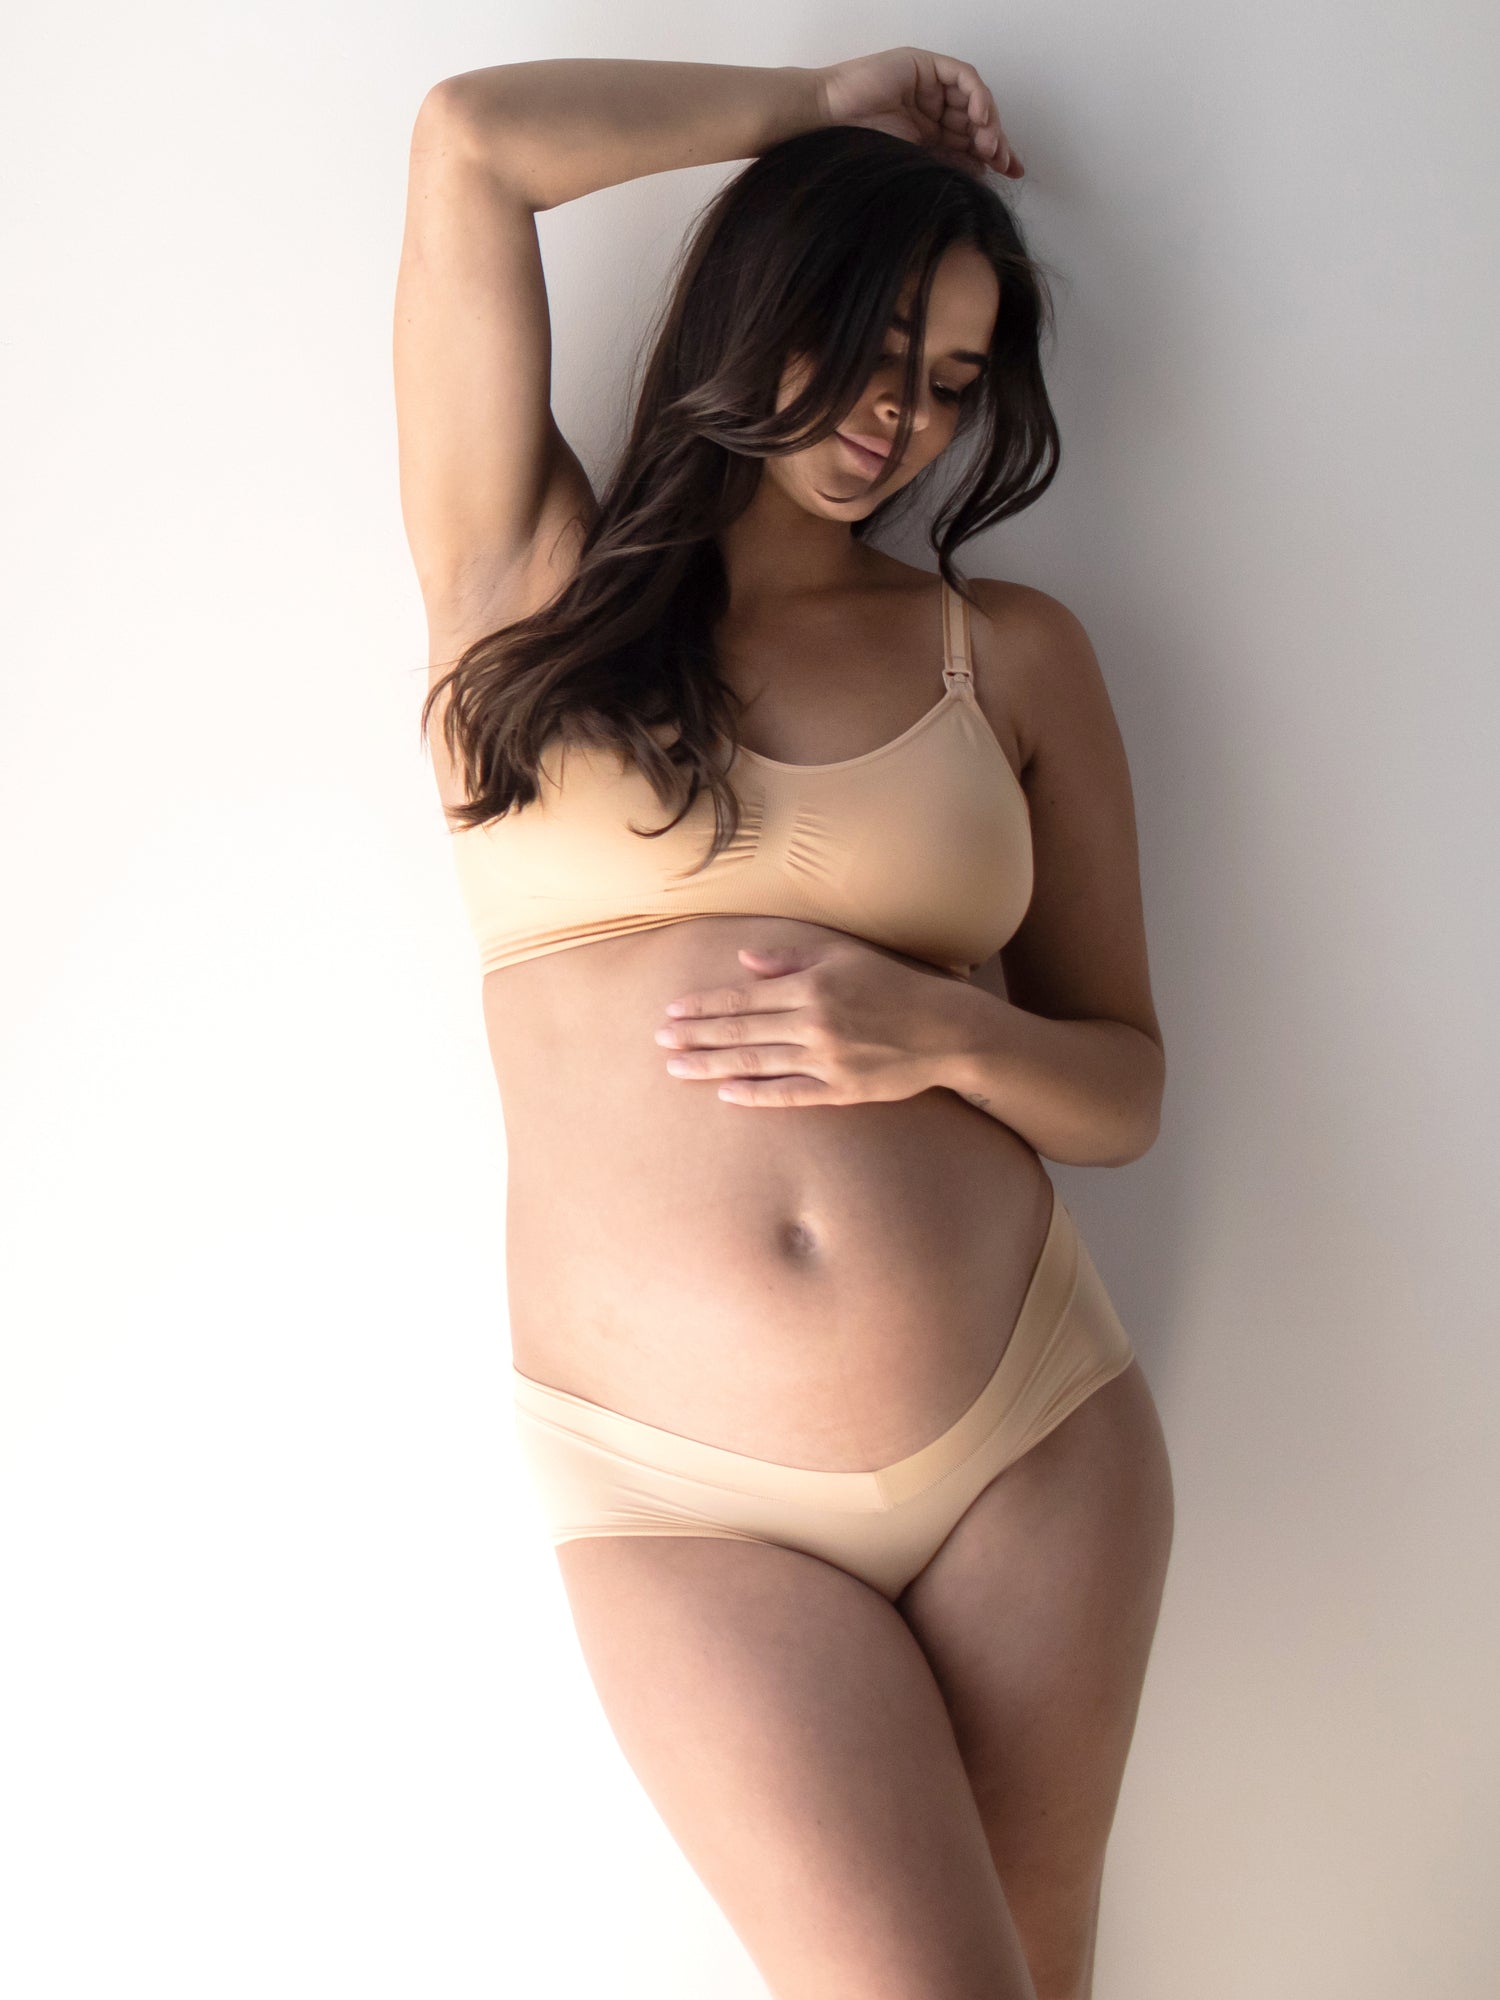 Pregnancy Support Brief in Beige, Maternity, Active Truth